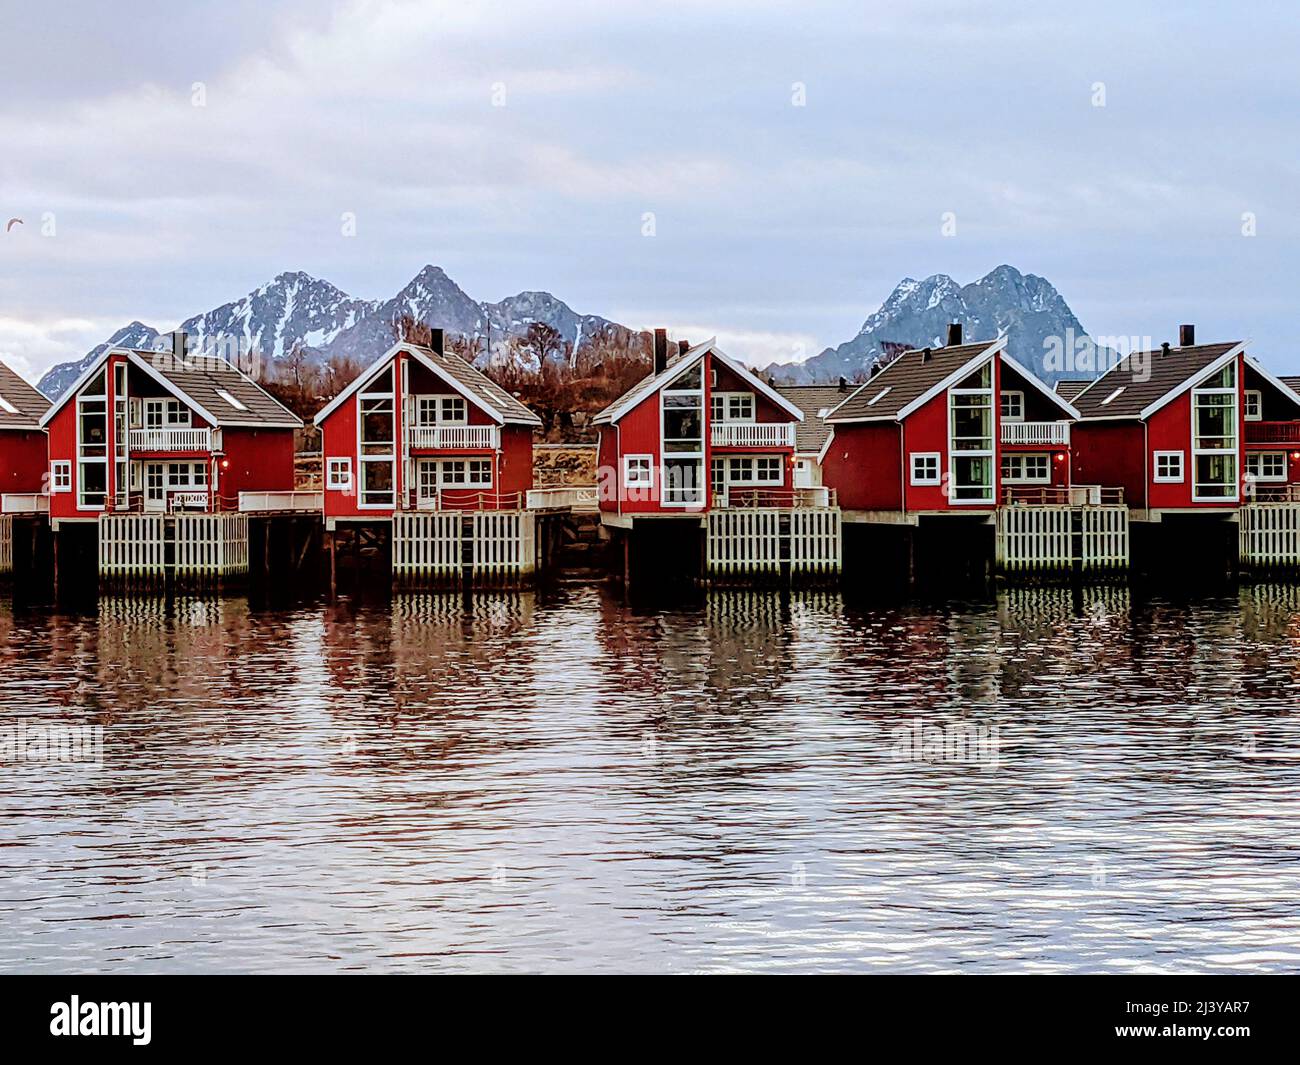 Rorbu cottages in Svolvaer, Lofoten Islands, Norway, with background mountains Stock Photo